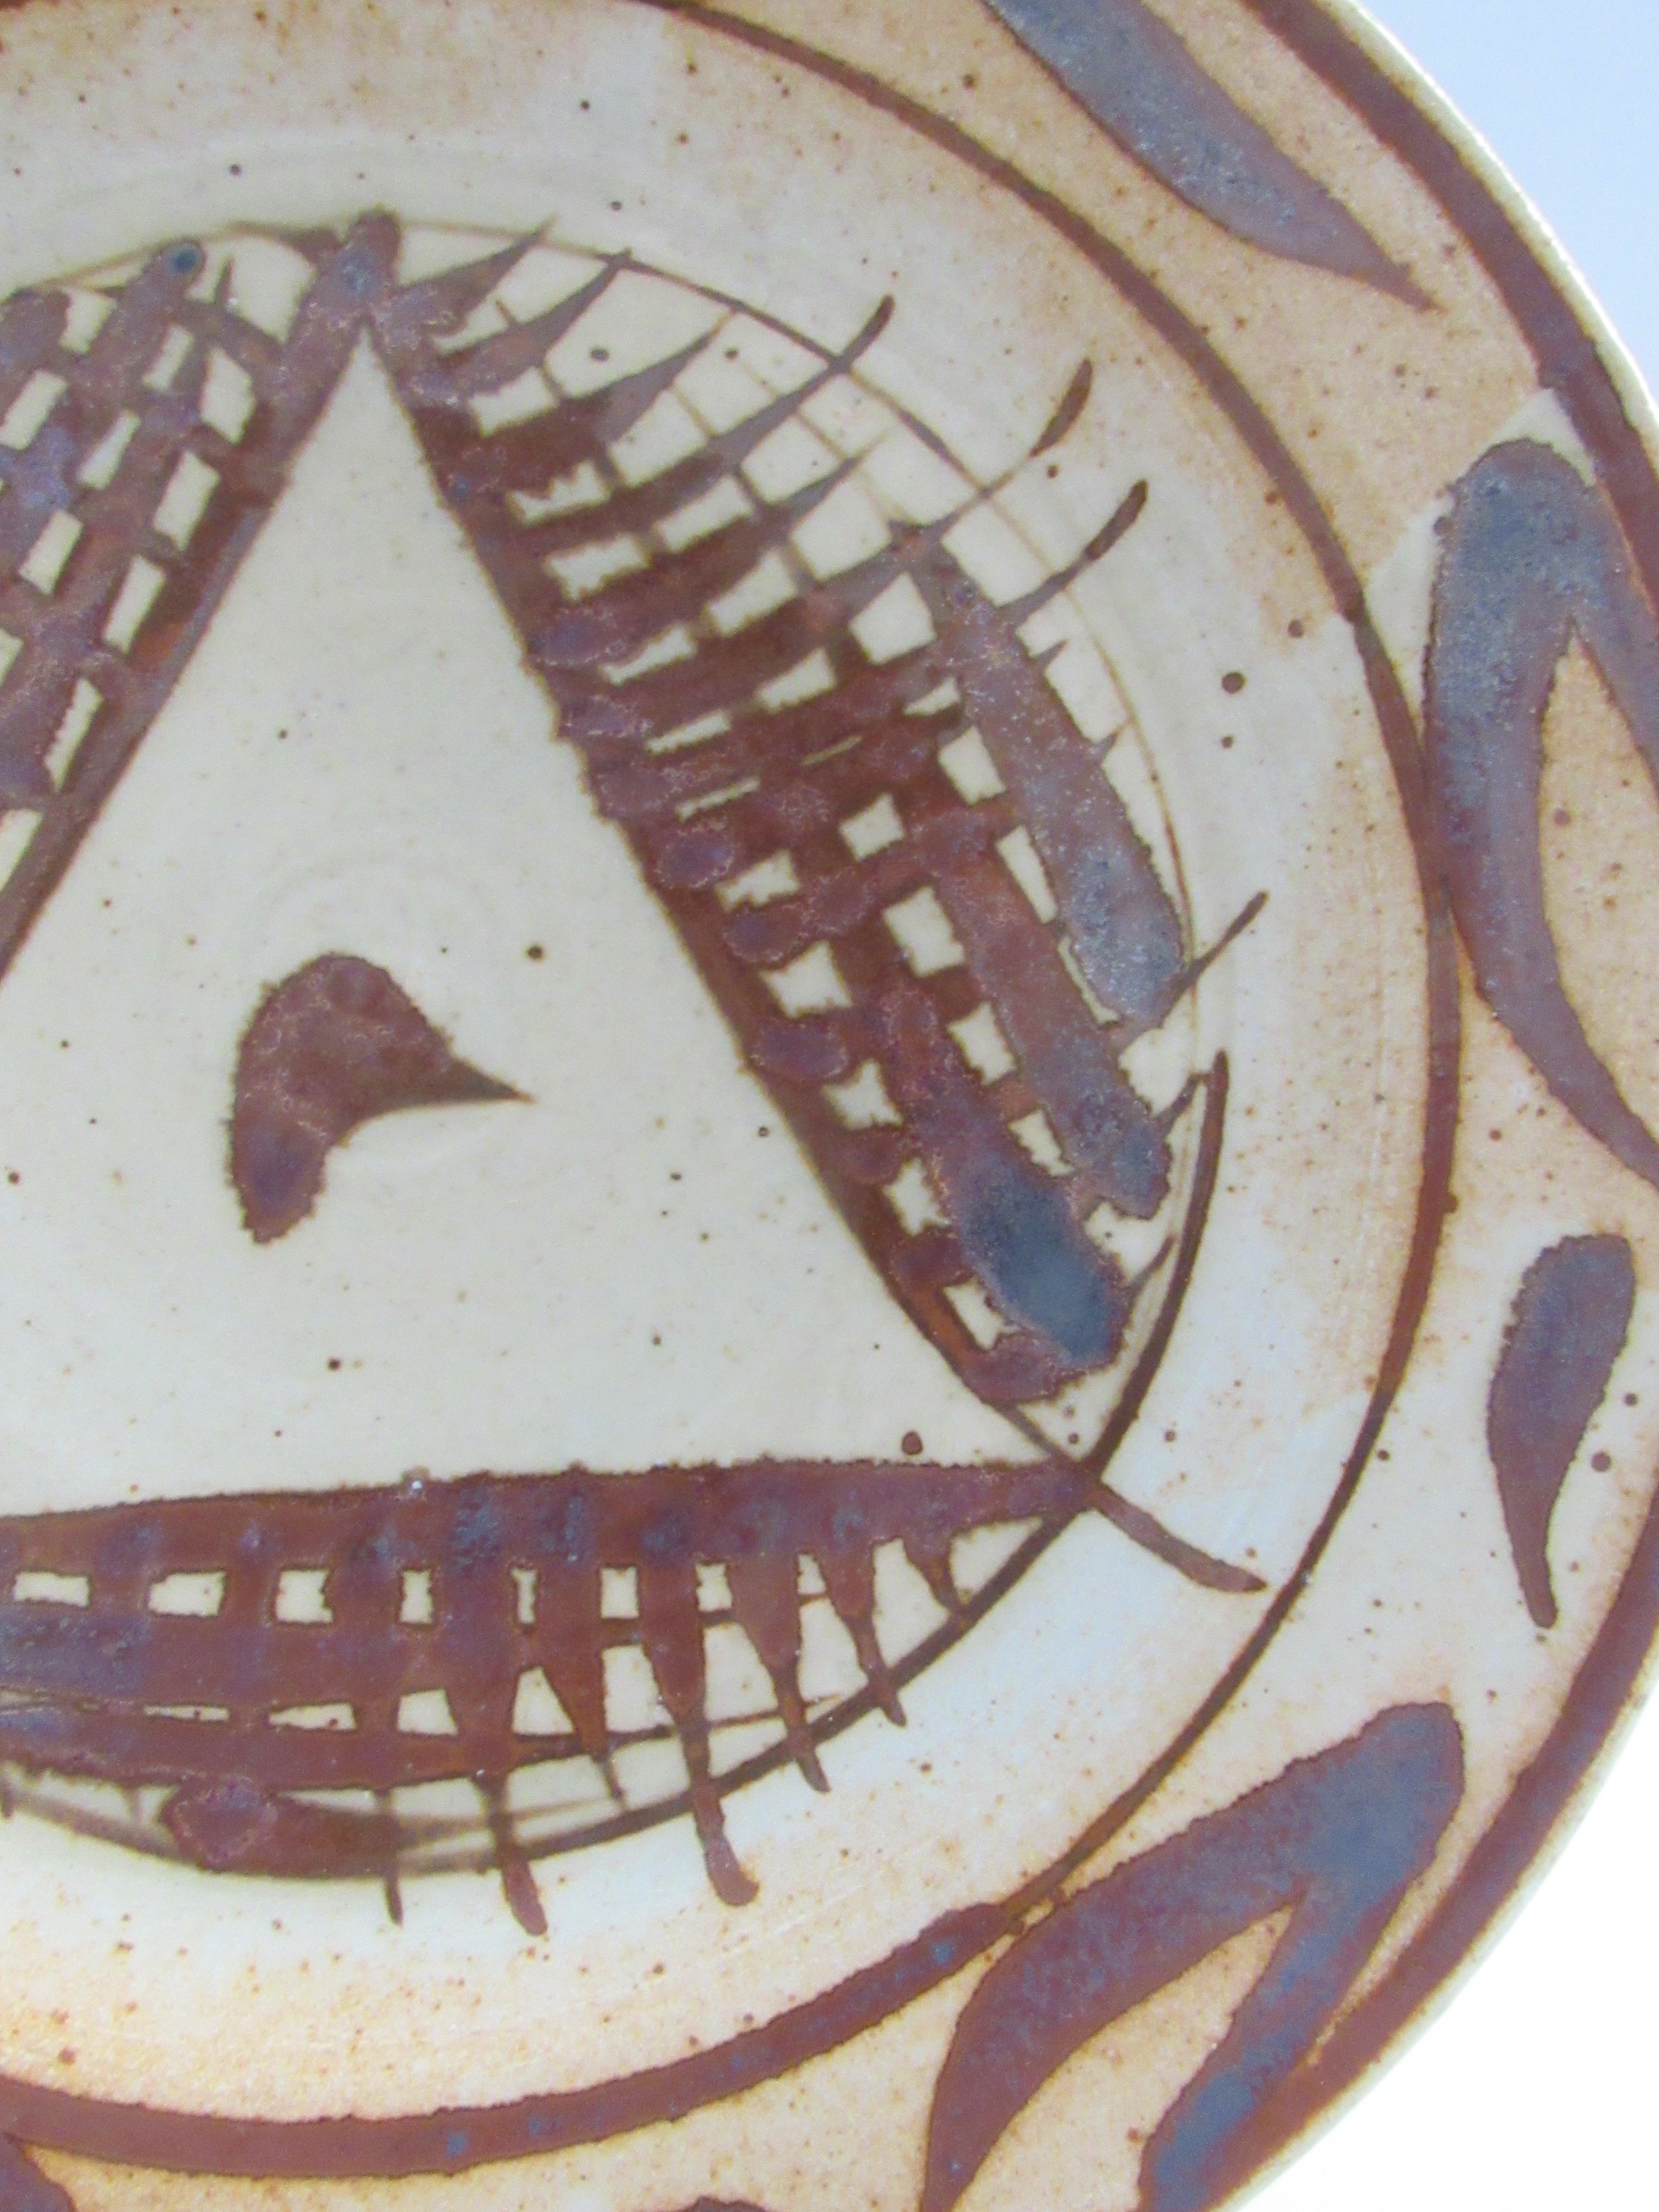 A Wenford Bridge Pottery plate, brushwork detail in tenmoku glaze. Possibly by Michael Cardew, - Image 2 of 5